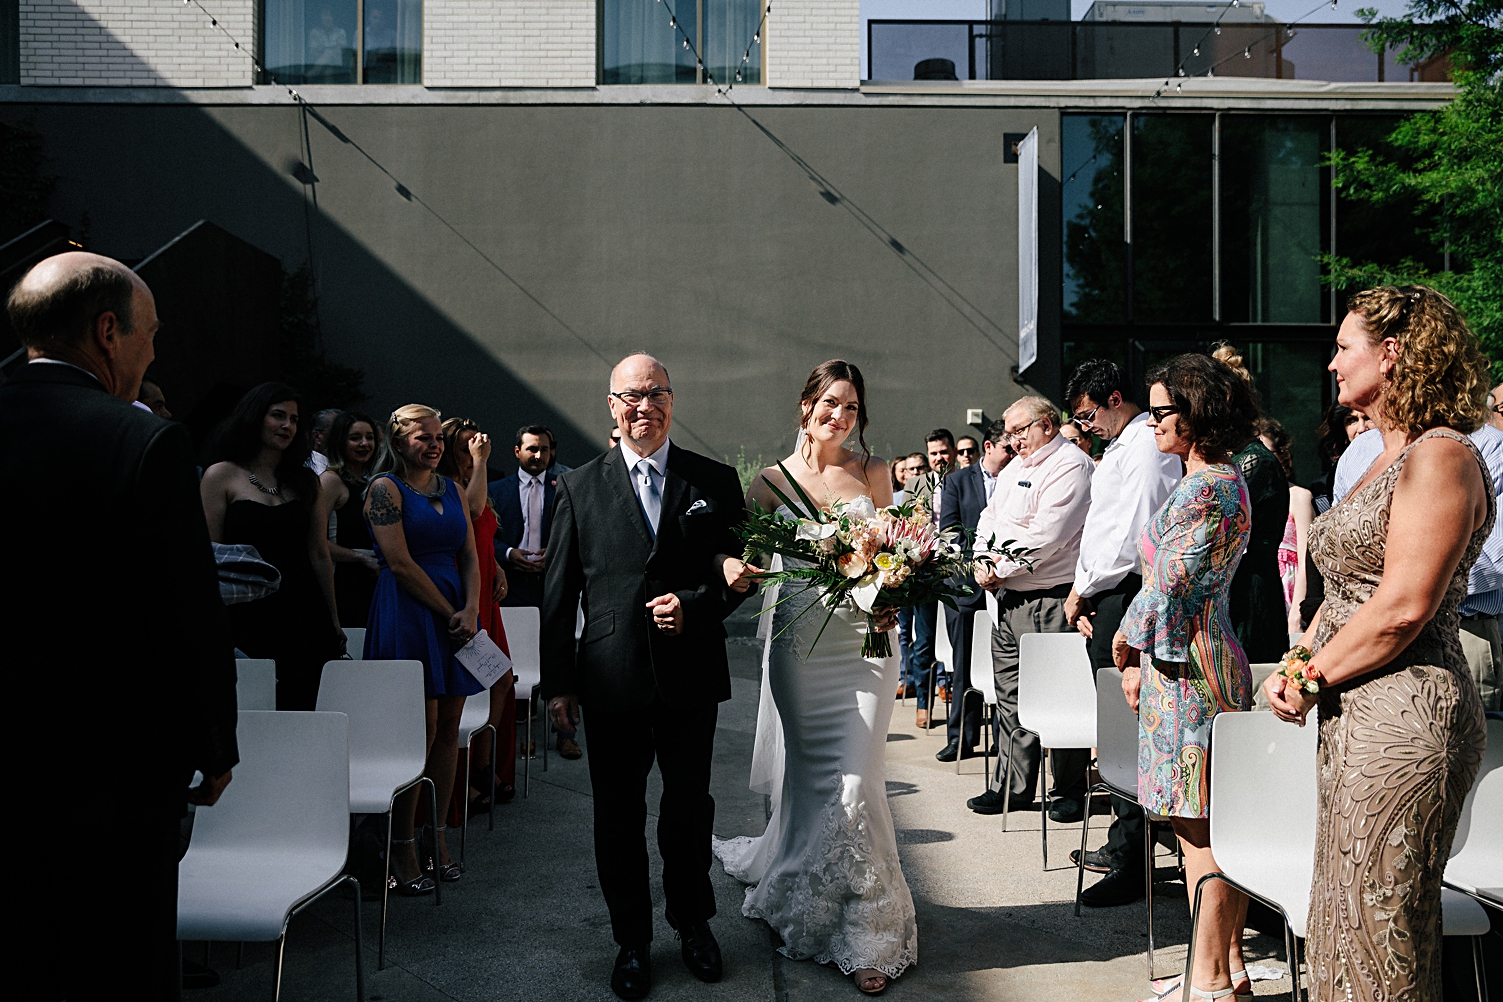 father and bride walking down aisle south congress hotel wedding austin